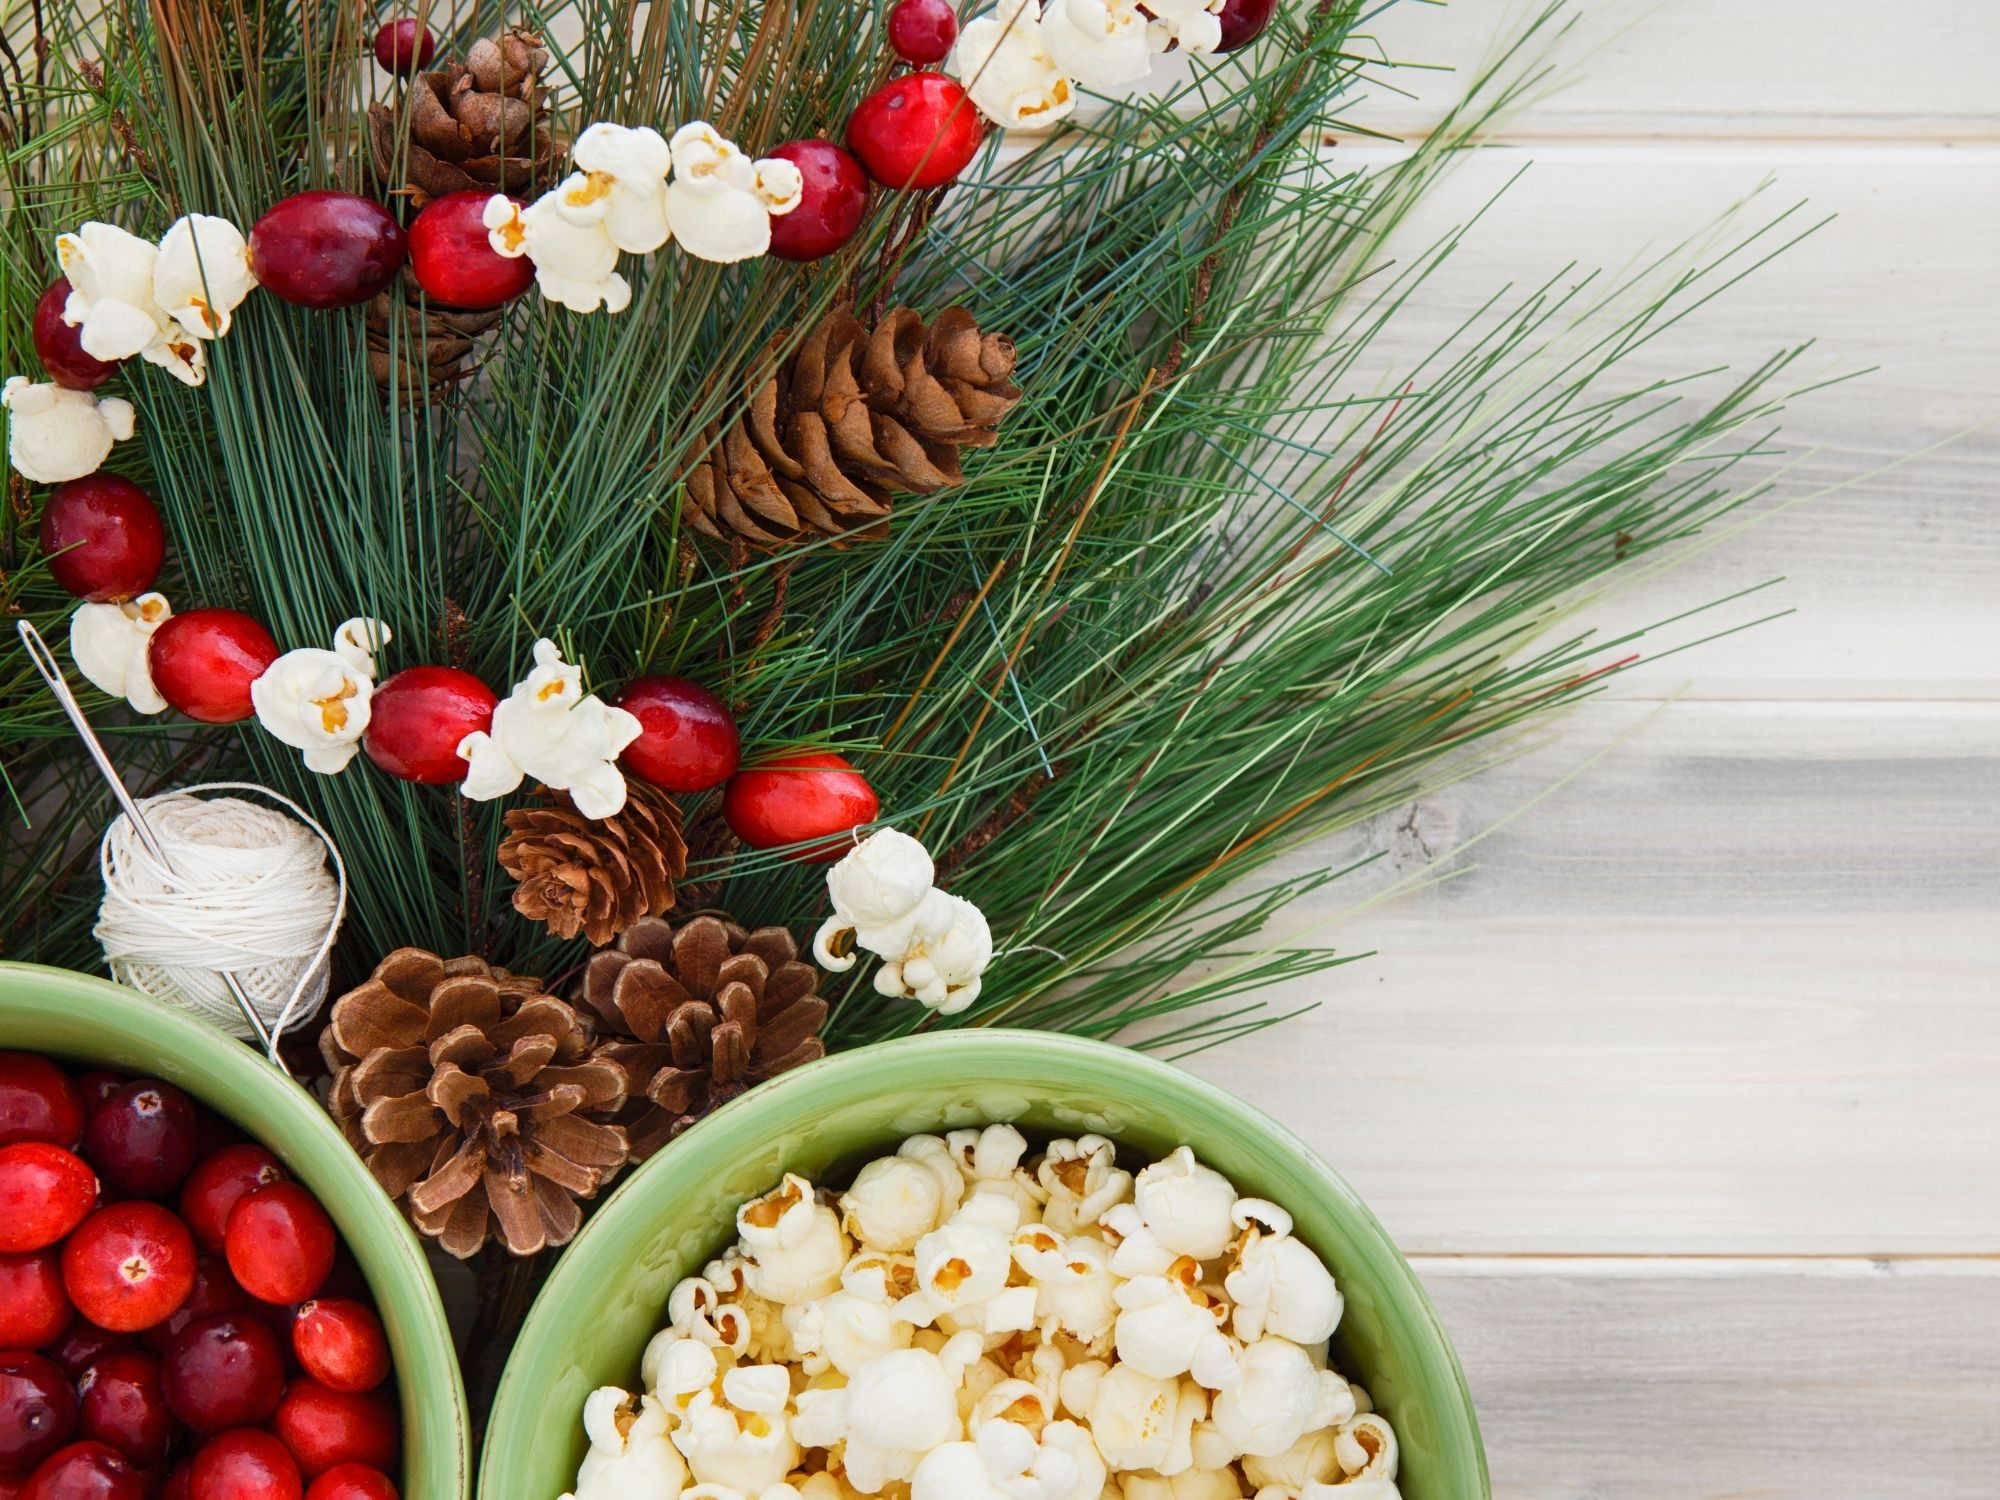 bowls of popcorn and cranberries, next to springs of pine, and a garland in process.